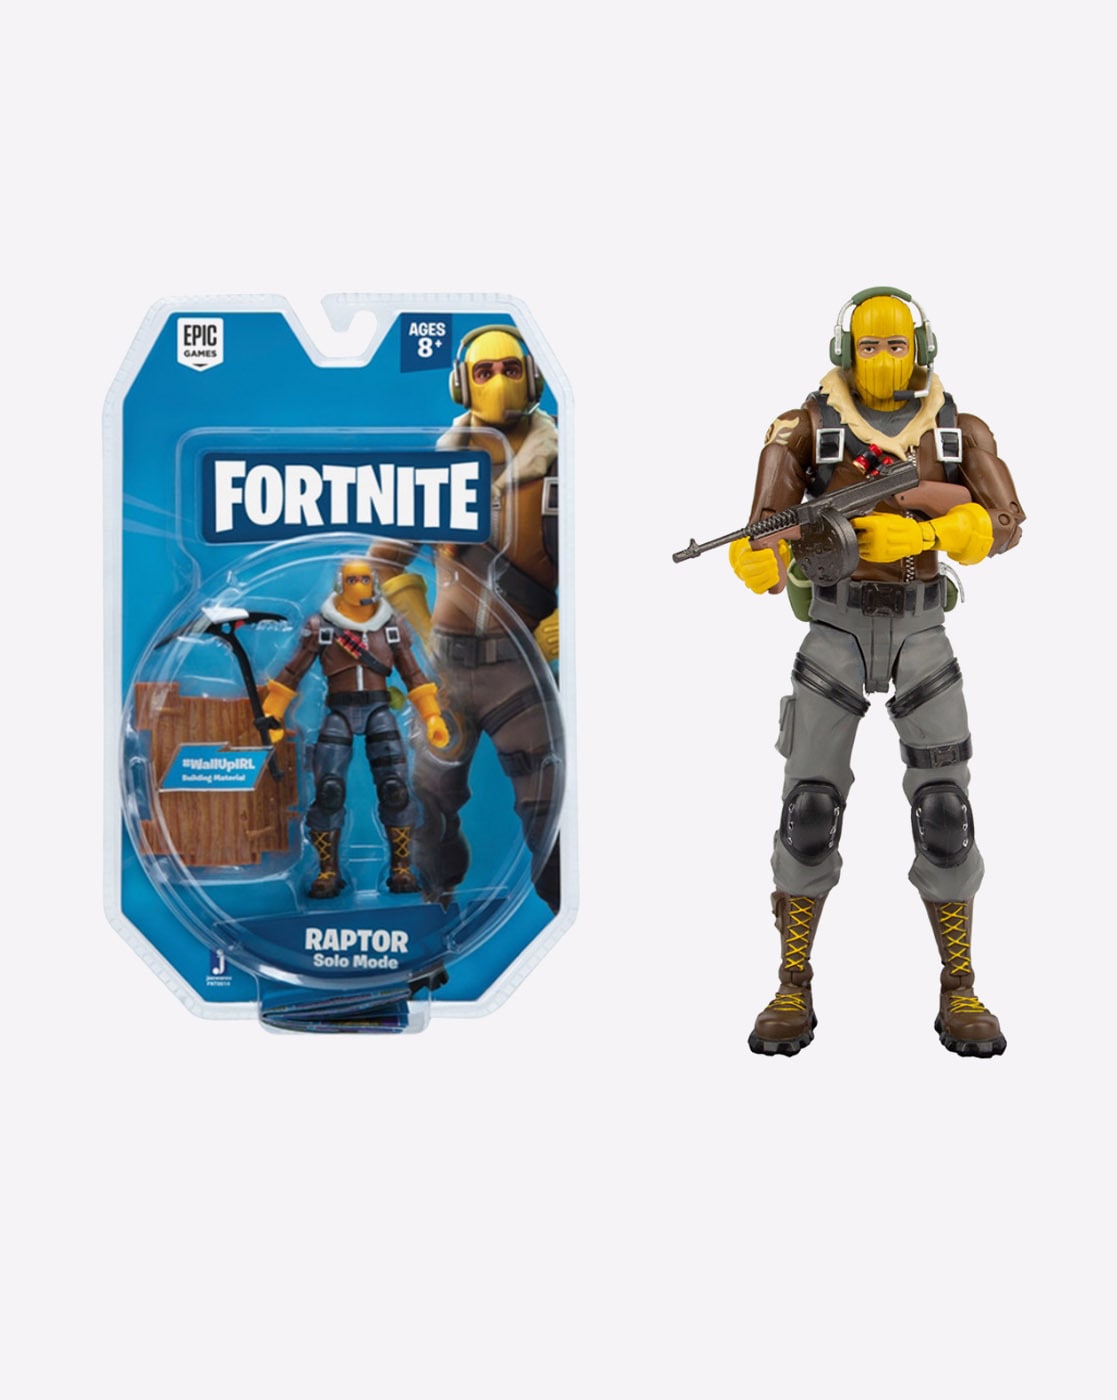 48 Top Pictures Fortnite Action Figures Cheap / Fortnite Nitehare ... -  1117Wx1400H 4915677620 Multi MODEL